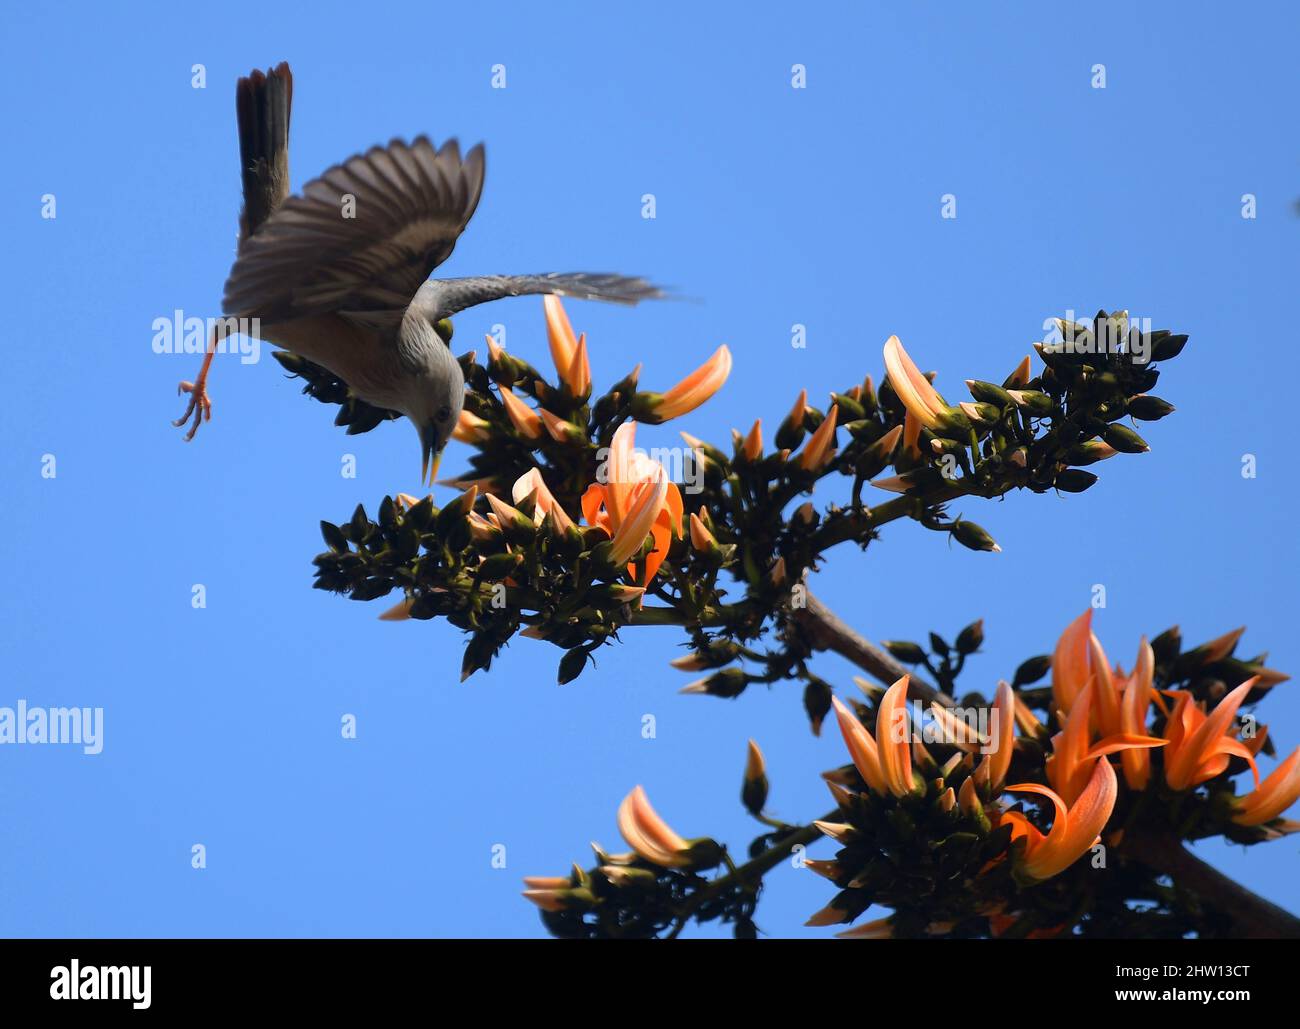 (220303) -- AGARTALA, March 3, 2022 (Xinhua) -- A bird collects nectar from flowers on the outskirts of Agartala, the capital city of India's northeastern state of Tripura, March 3, 2022. The World Wildlife Day is observed on March 3 every year to raise the awareness on the world's wild animals and plants. (Str/Xinhua) Stock Photo